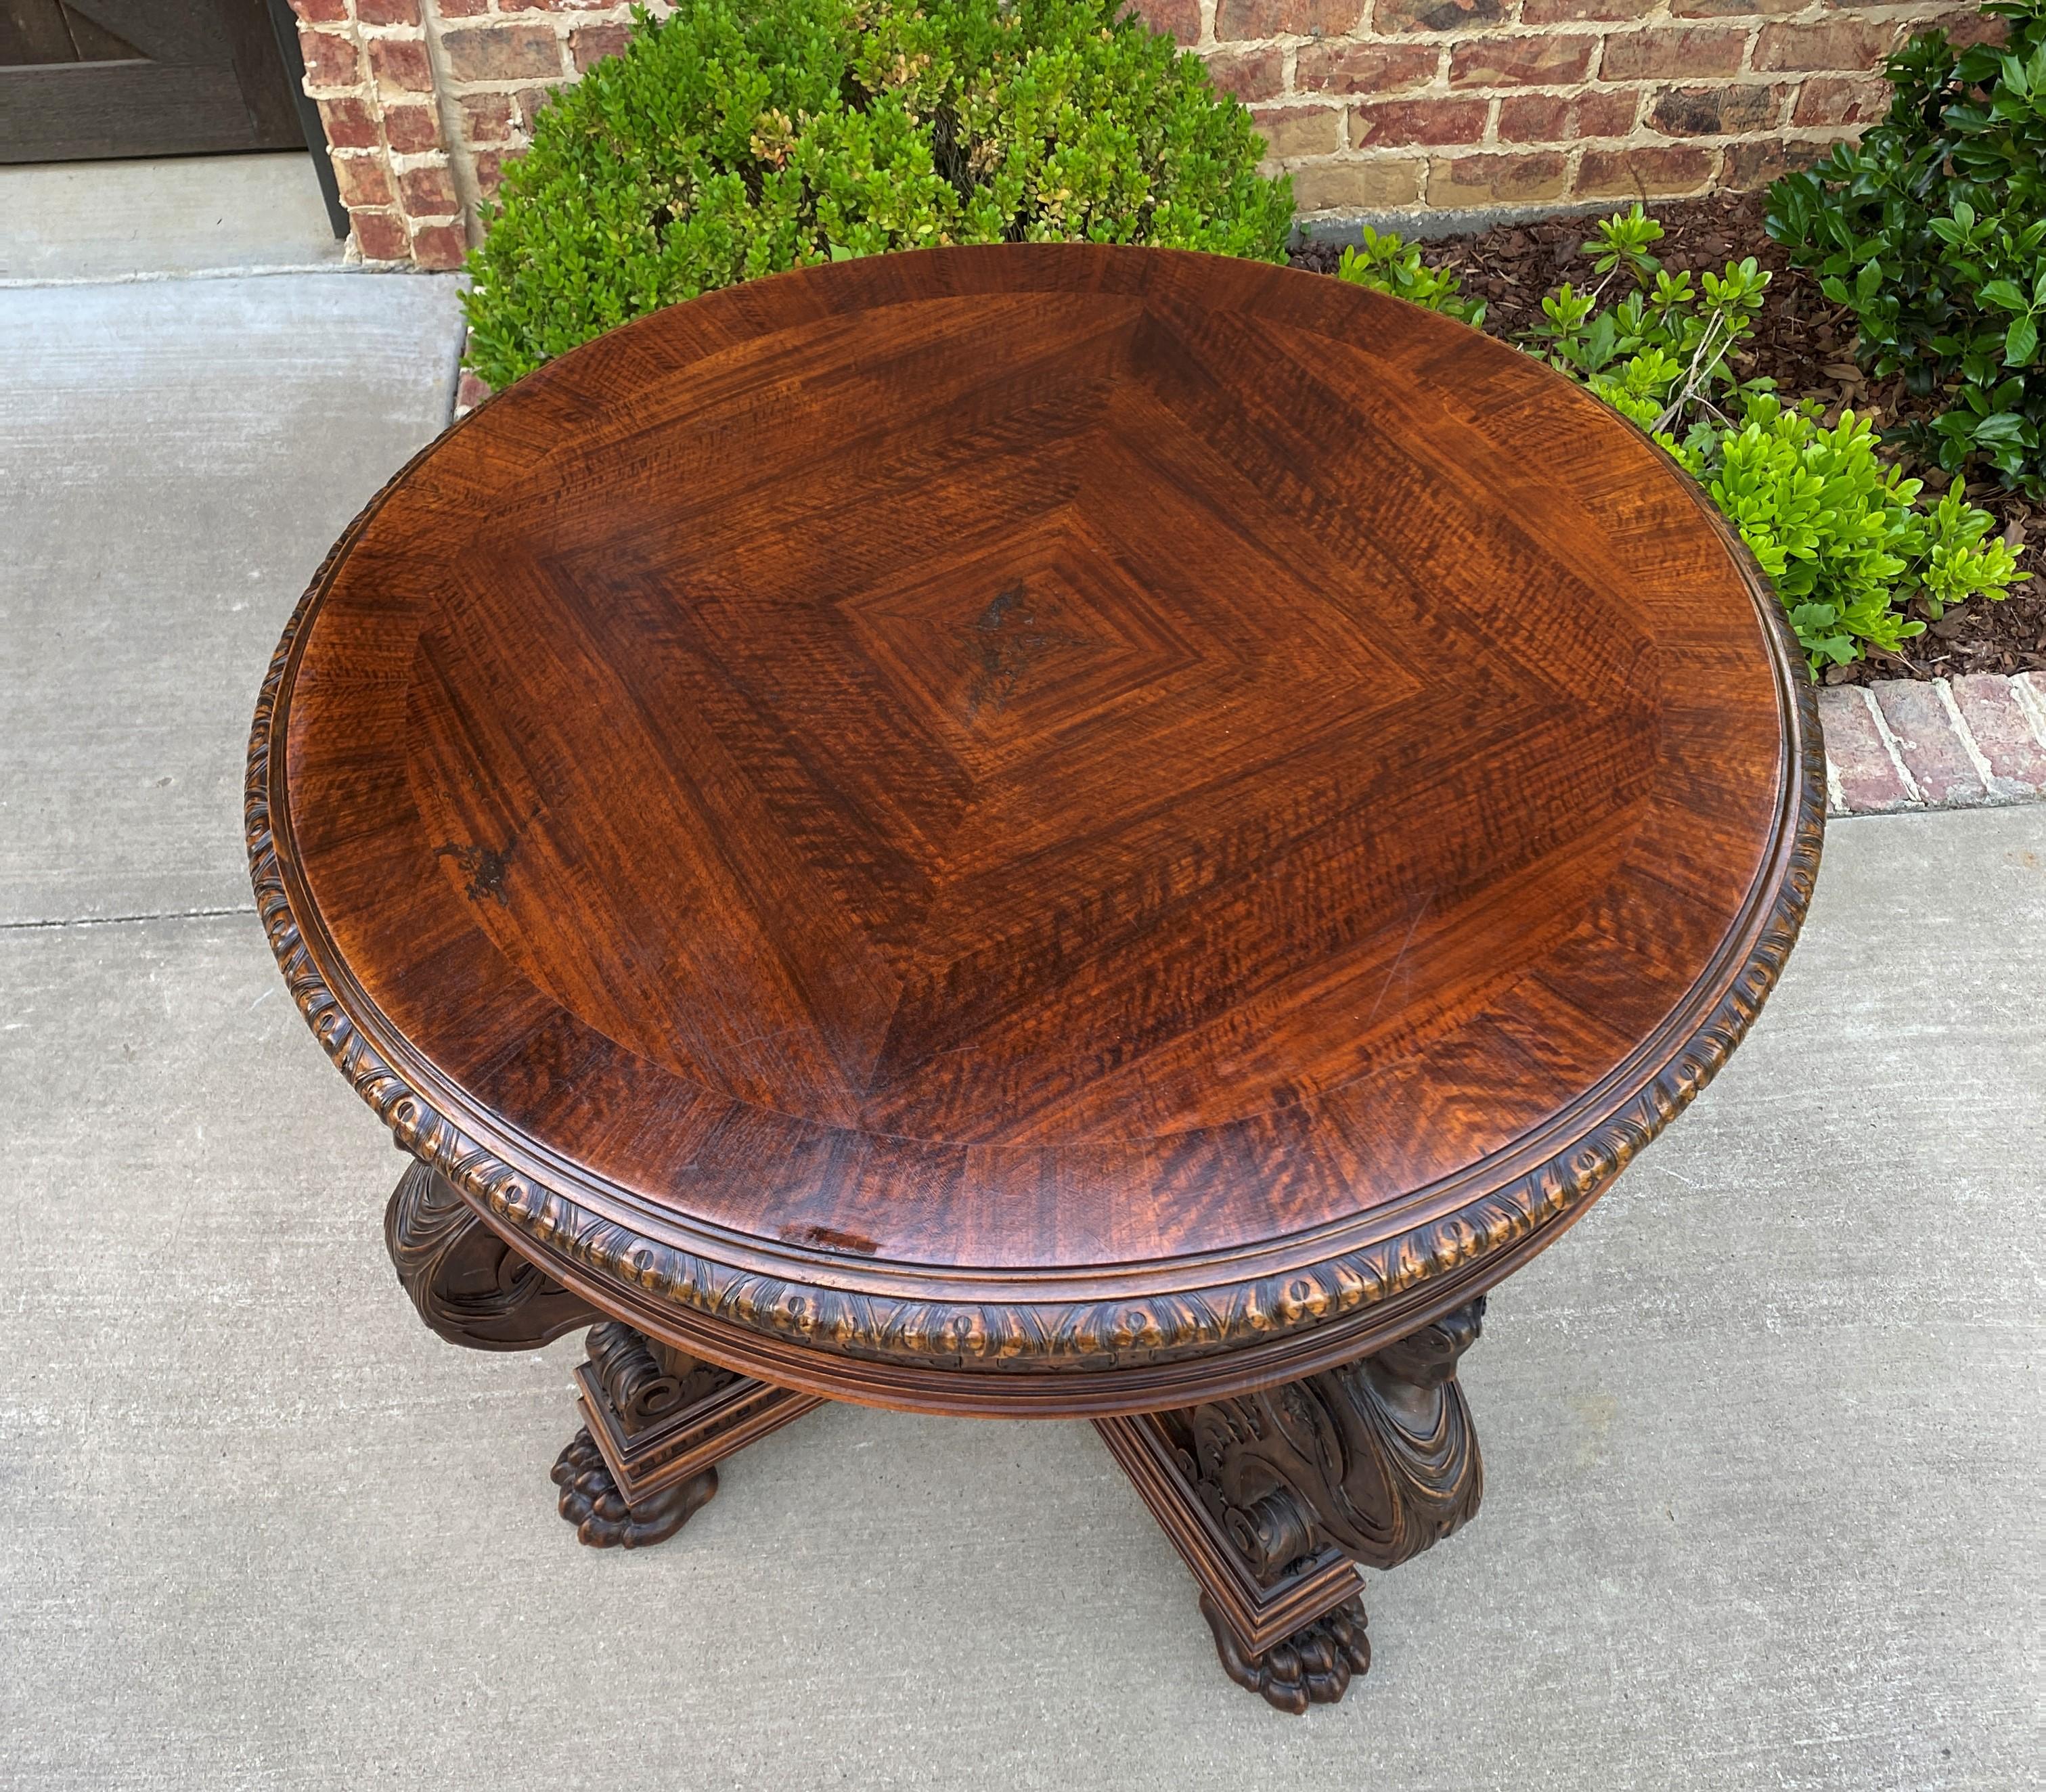 Carved Antique French Round Table Entry Center Parlor Table Renaissance Revival 19th C